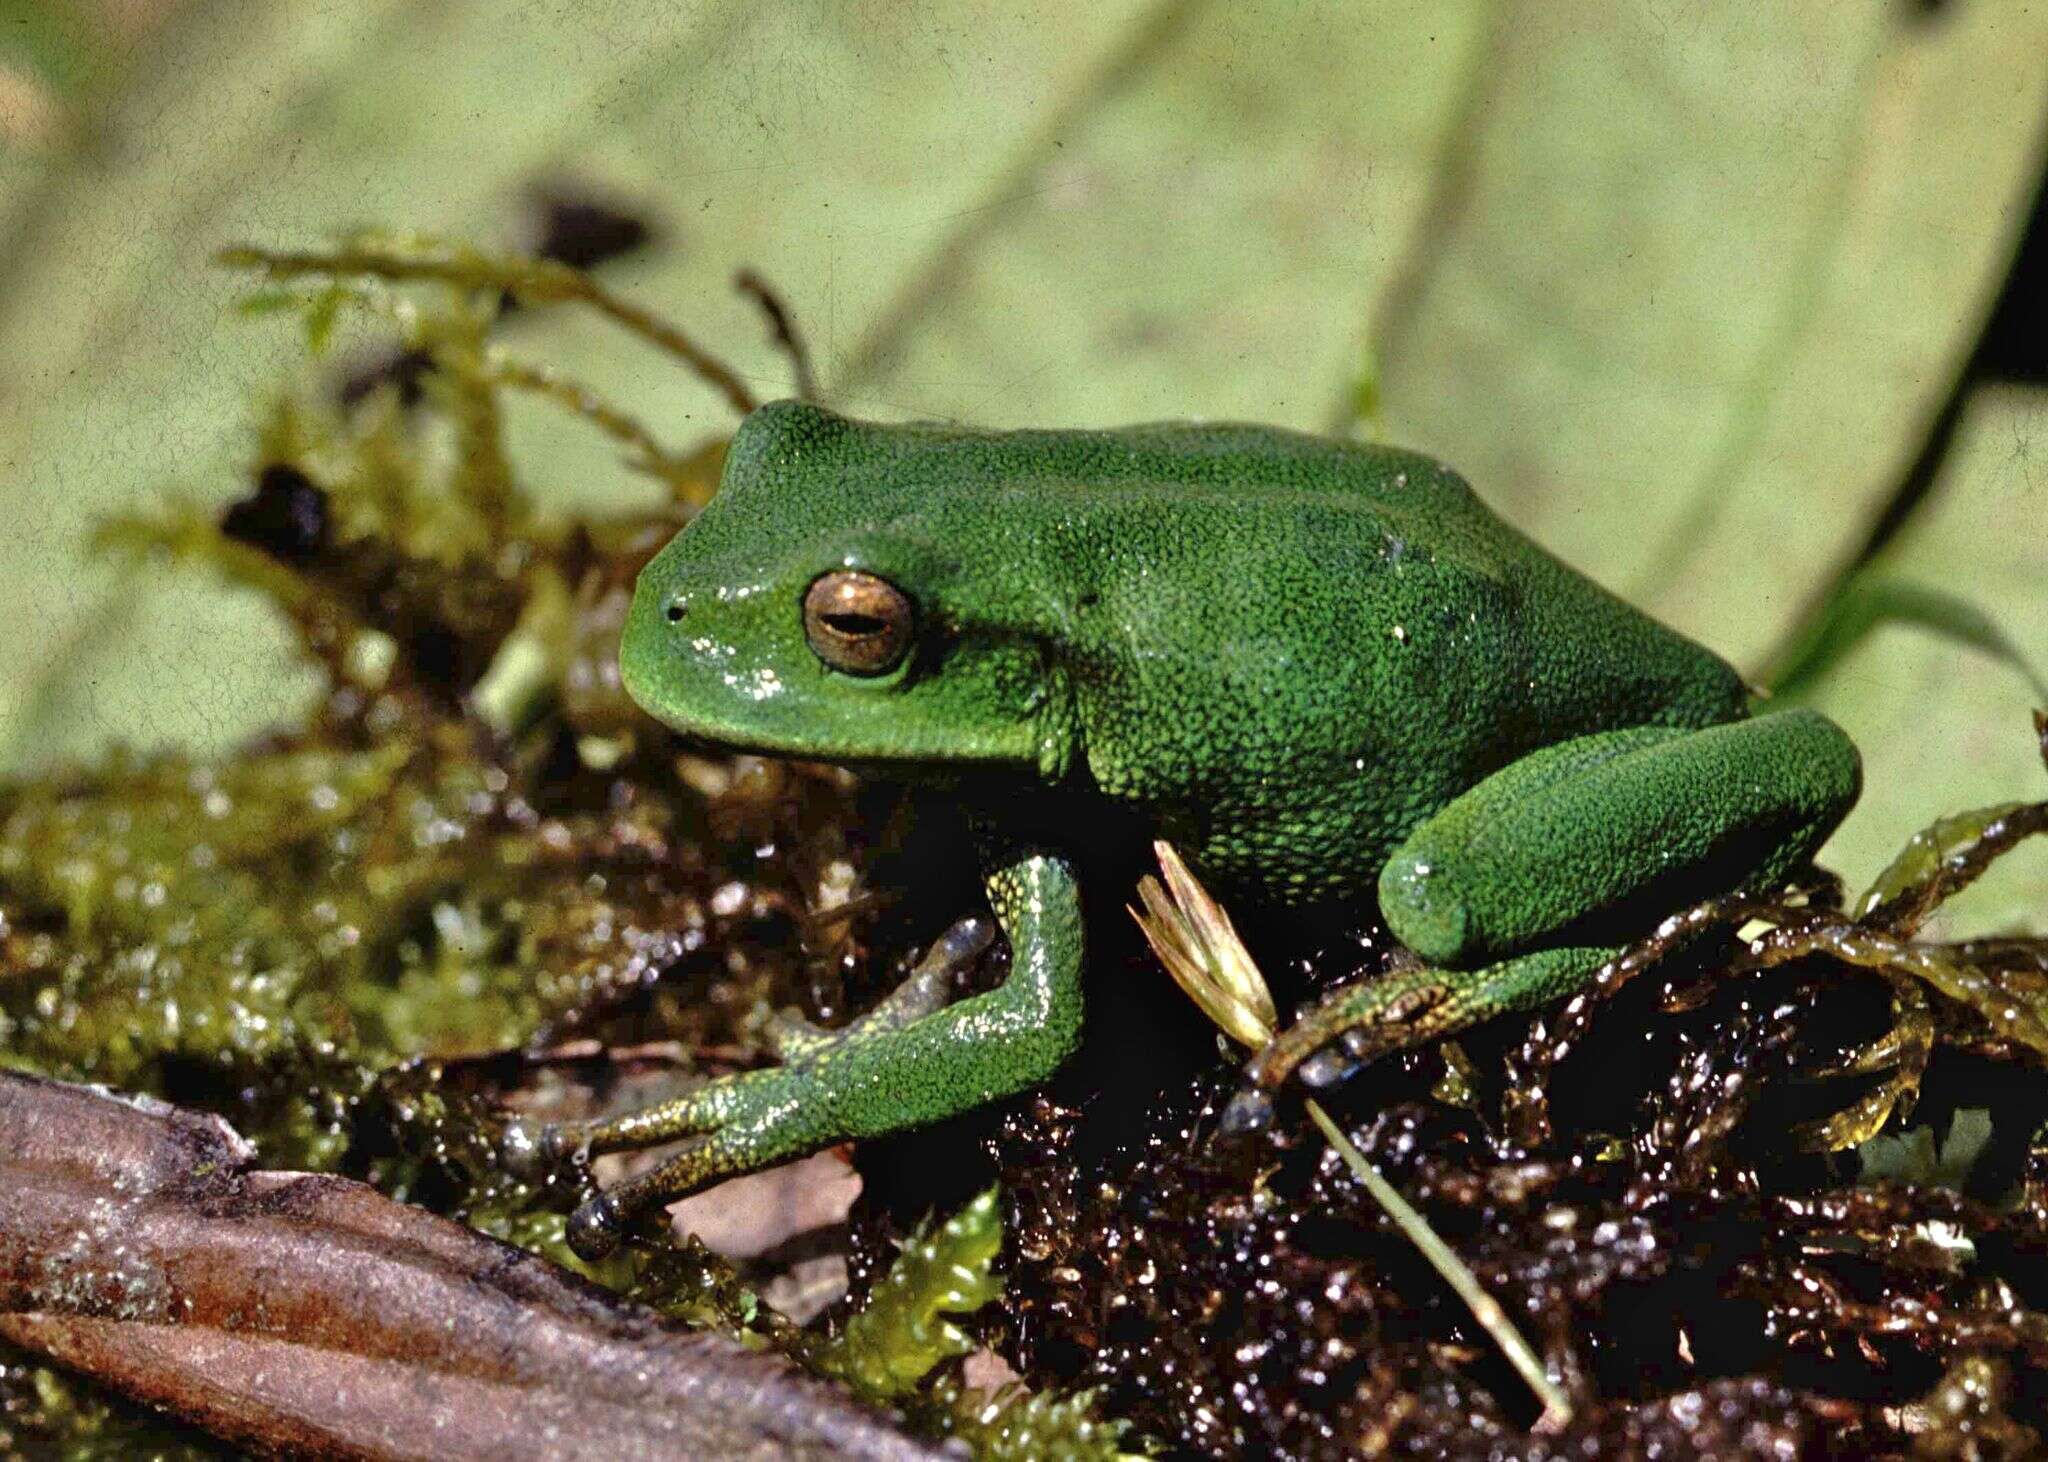 Image of Gastrotheca orophylax Duellman & Pyles 1980